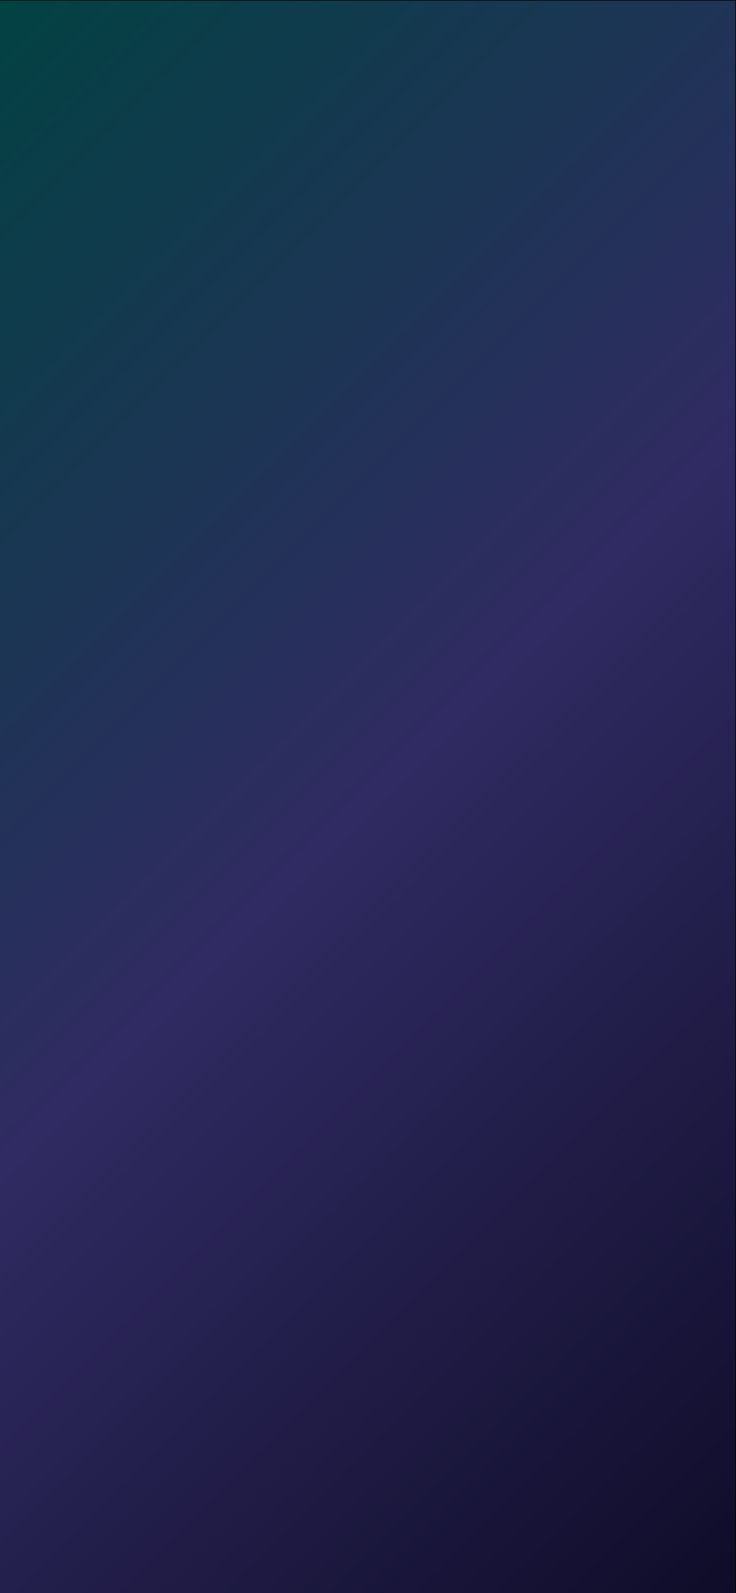 Best Gradient Background For iPhone 2021. Color wallpaper iphone, iPhone wallpaper smoke, Blue backdrops